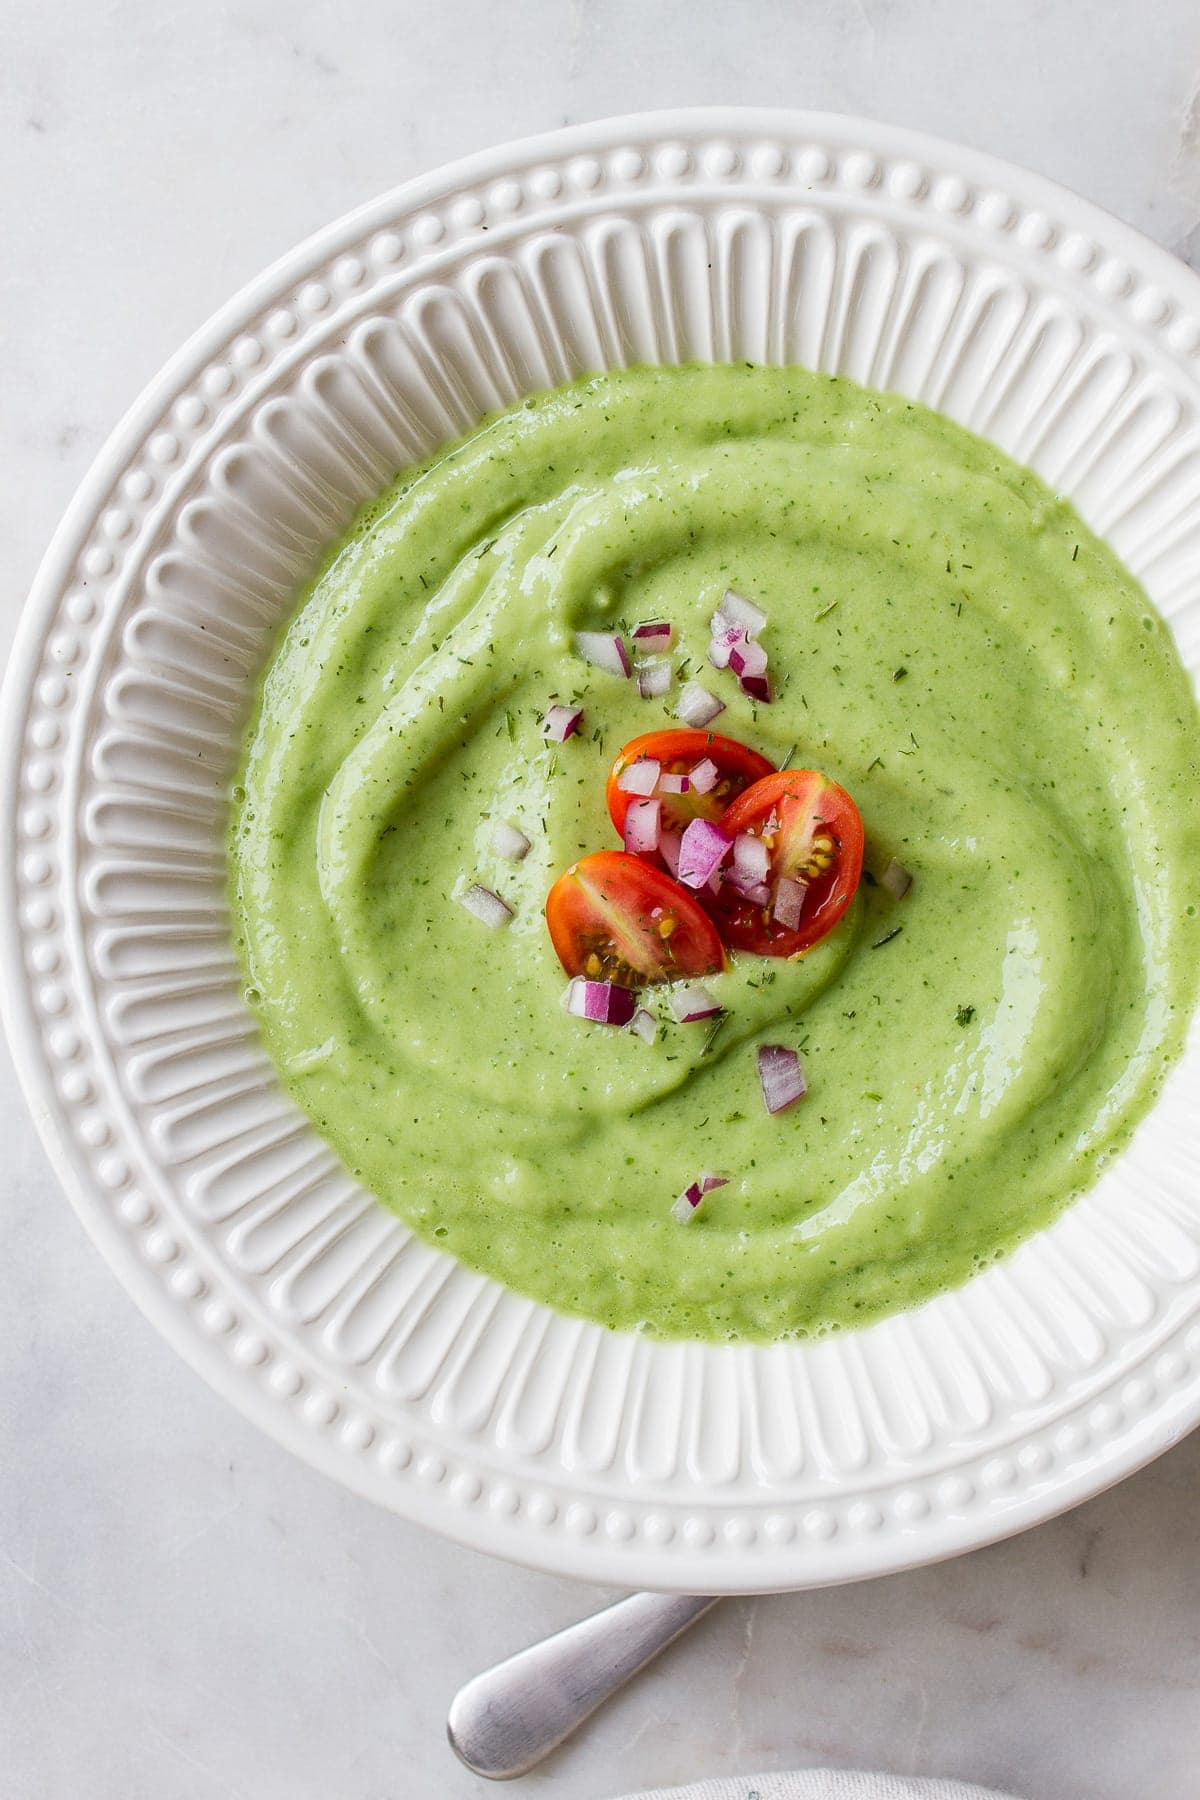 Chilled Avocado & Cucumber Soup